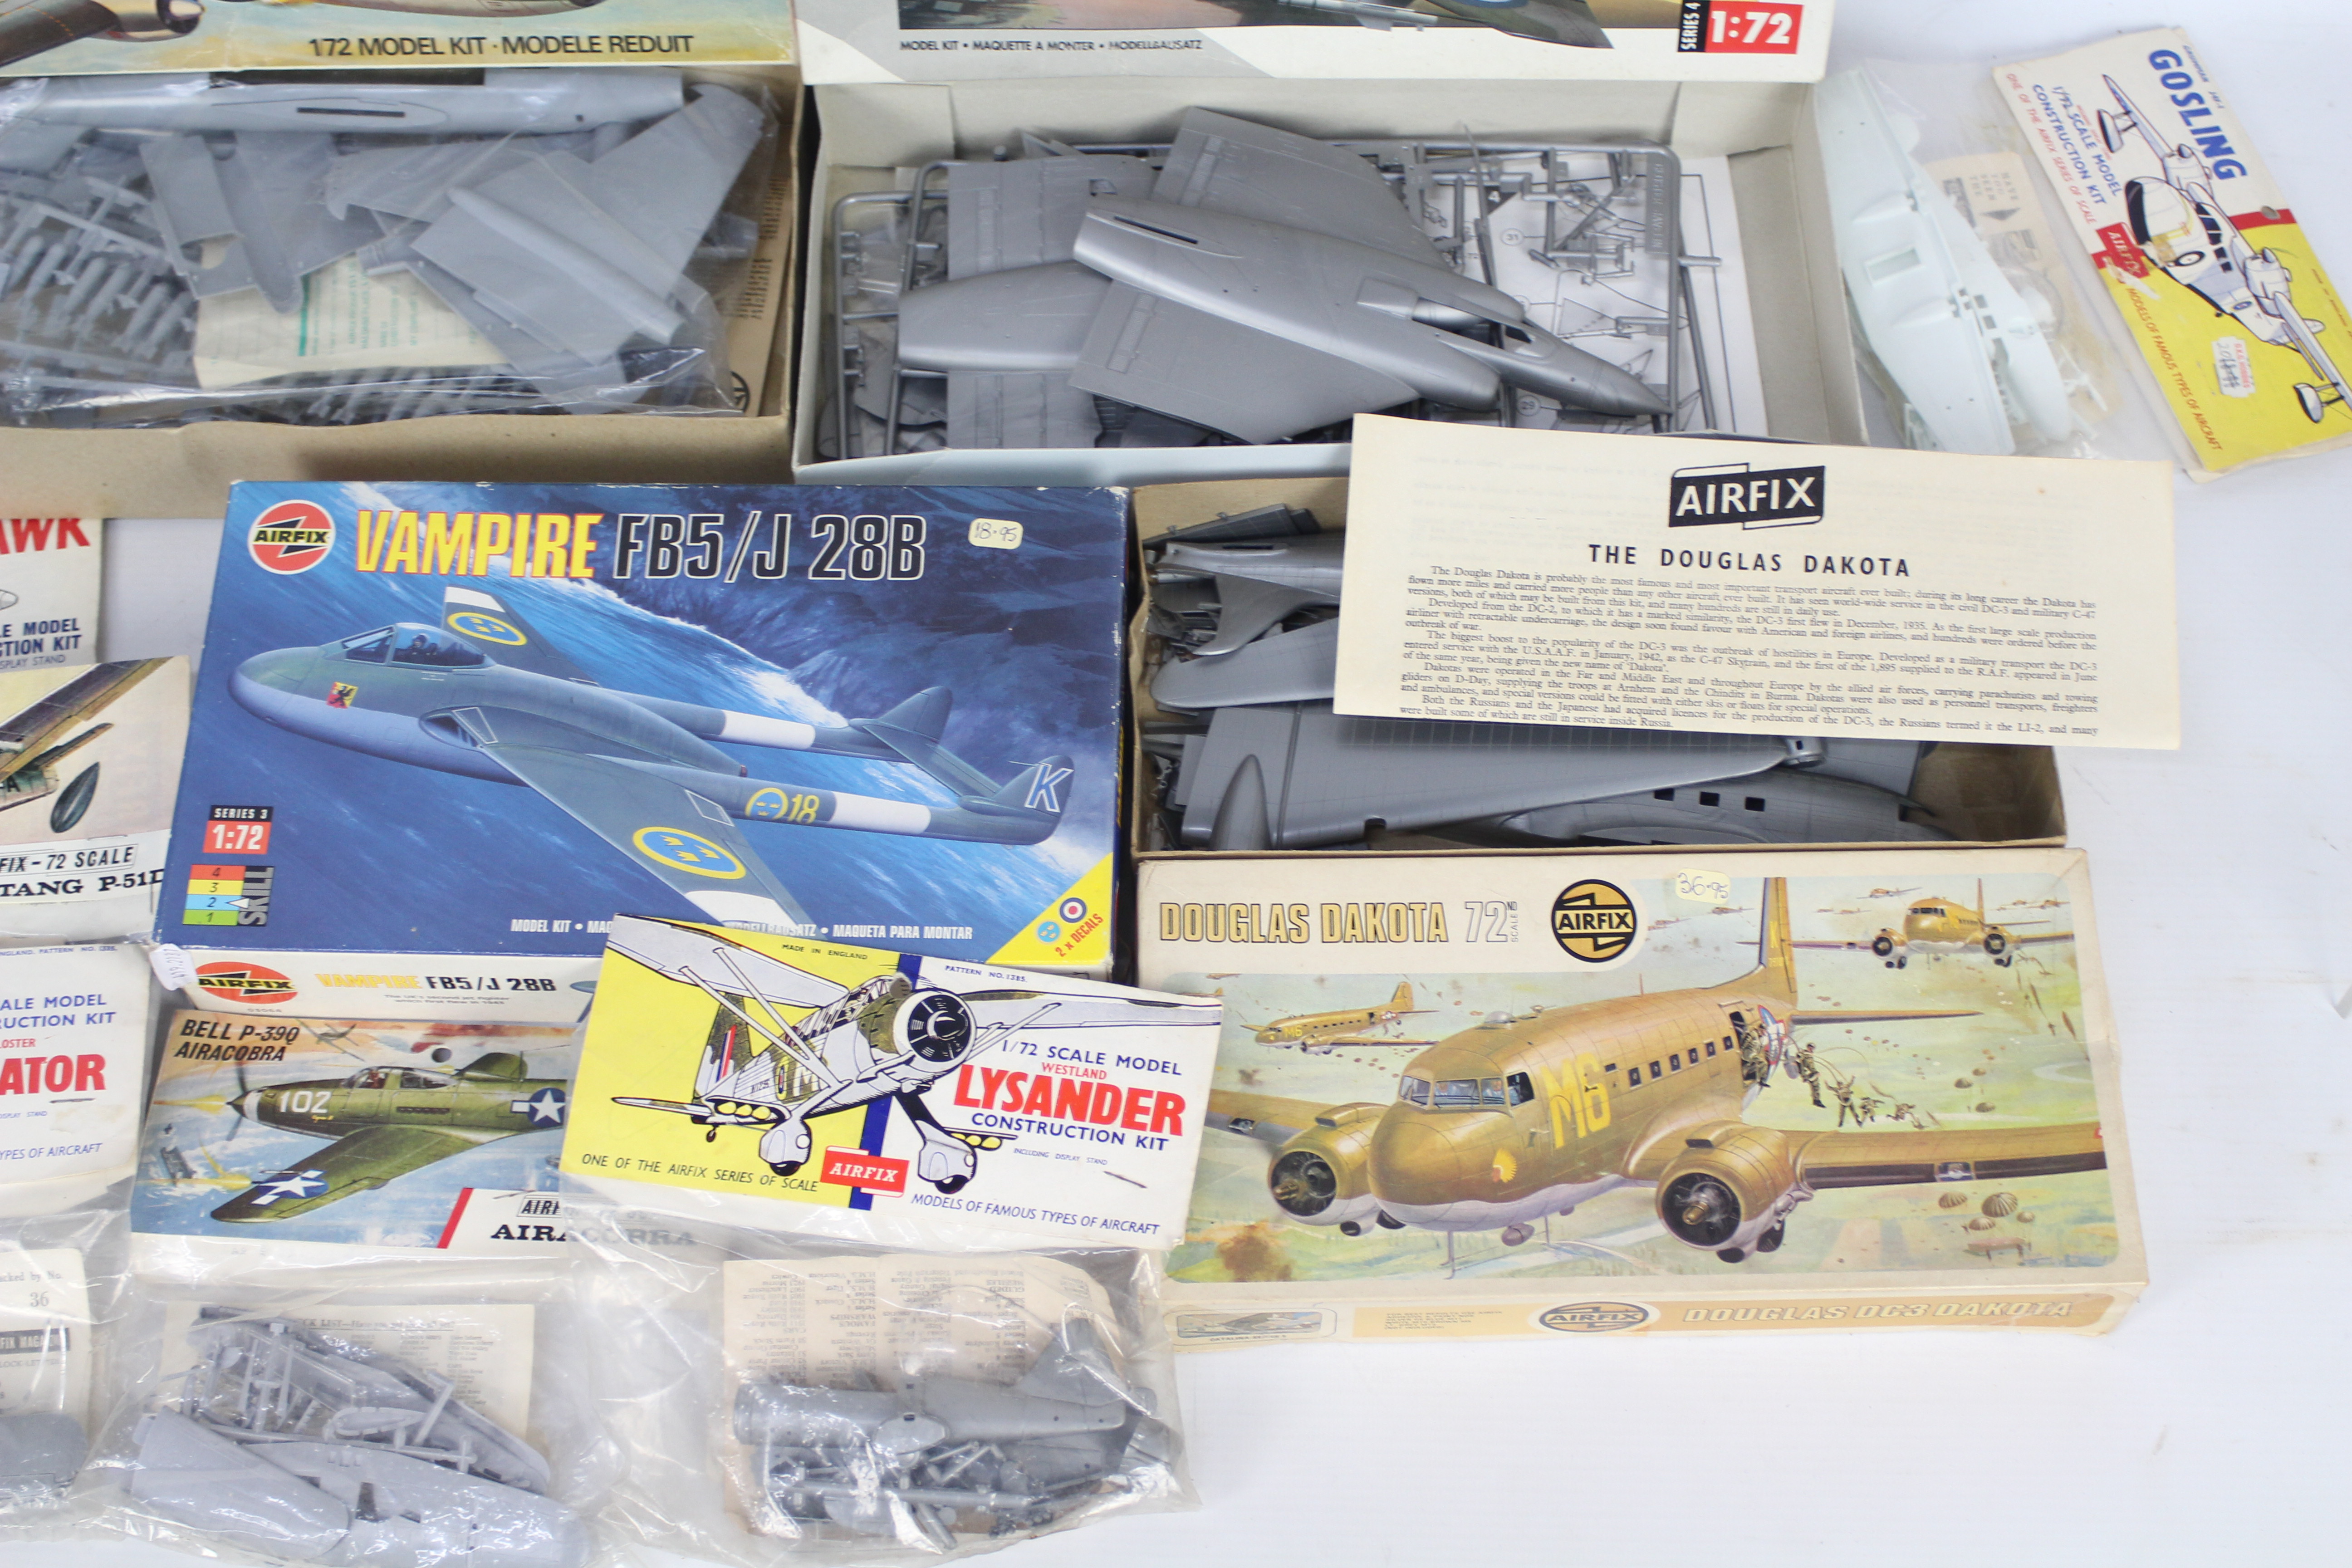 Airfix Kits - a collection of Airfix Kits to include 04045, 05012-8, 03064, 04003-1 and similar. - Image 4 of 4